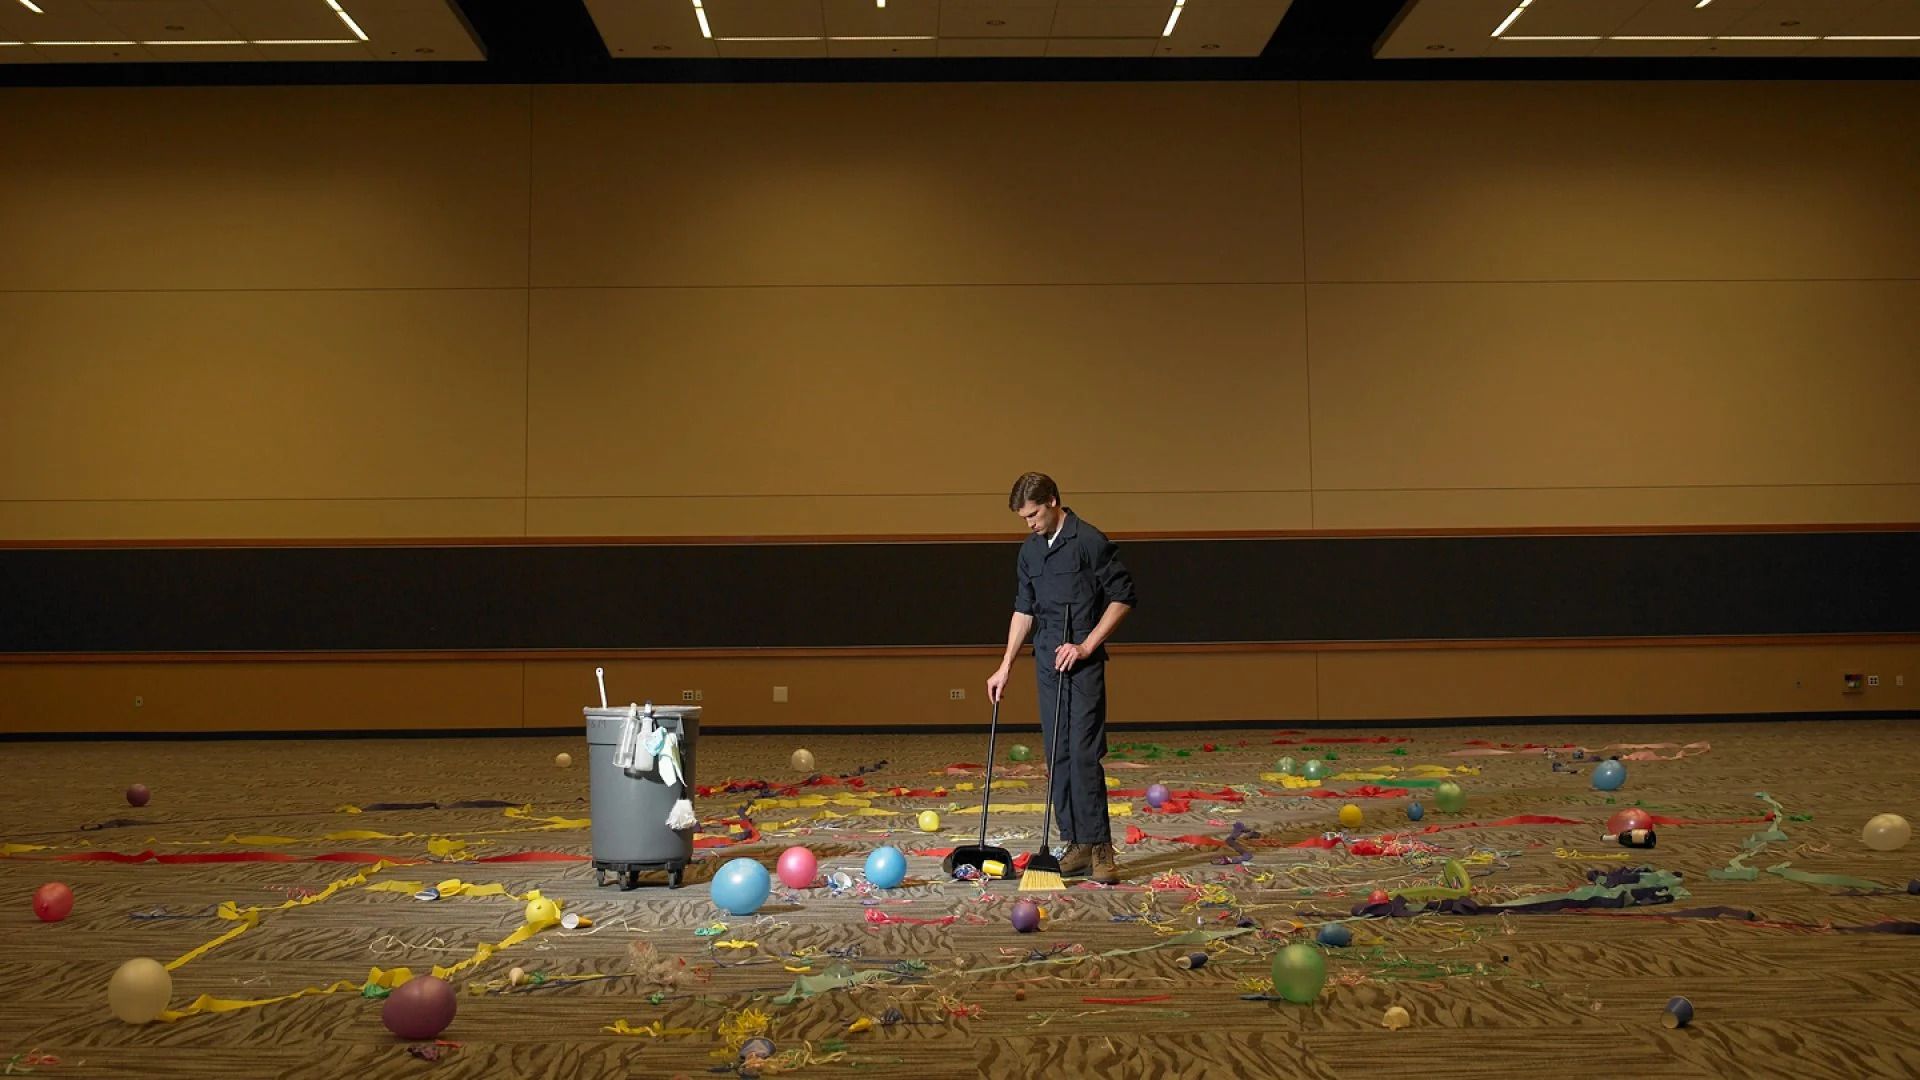 A man is cleaning a messy room with balloons and confetti.